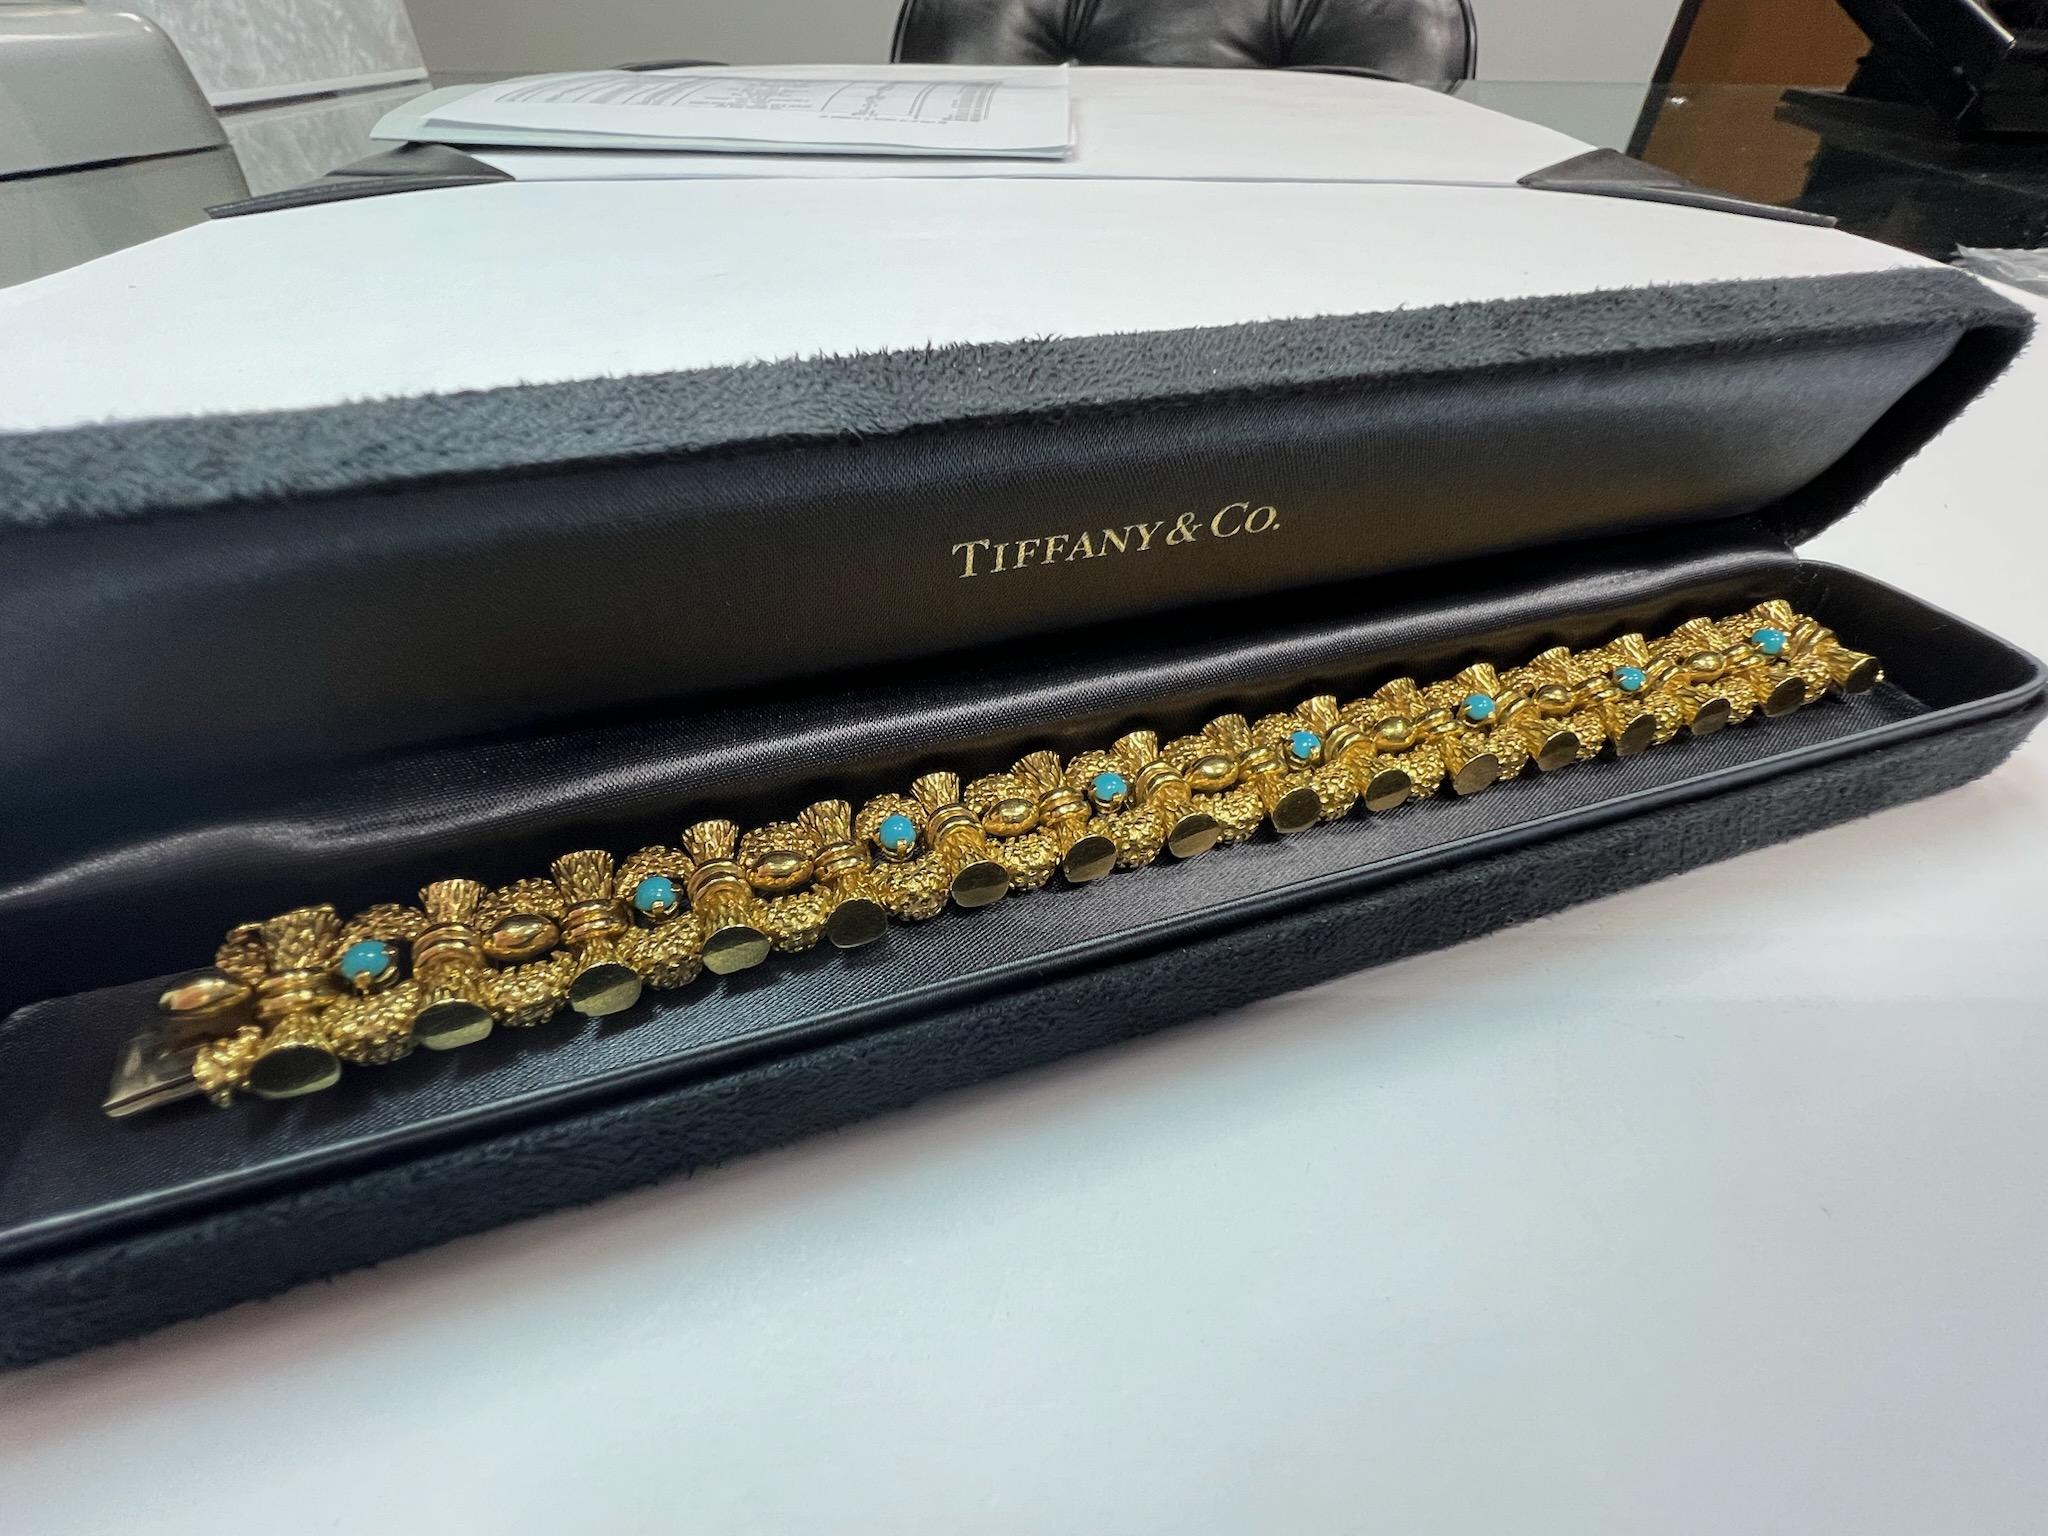 A magnificent Turquoise and 18k Yellow Gold TIFFANY&CO bracelet, Circa 1960's.

The weight is 87 grams, the length is 7 inches, width is little over 1/2 inch (15mm). 

No original papers.